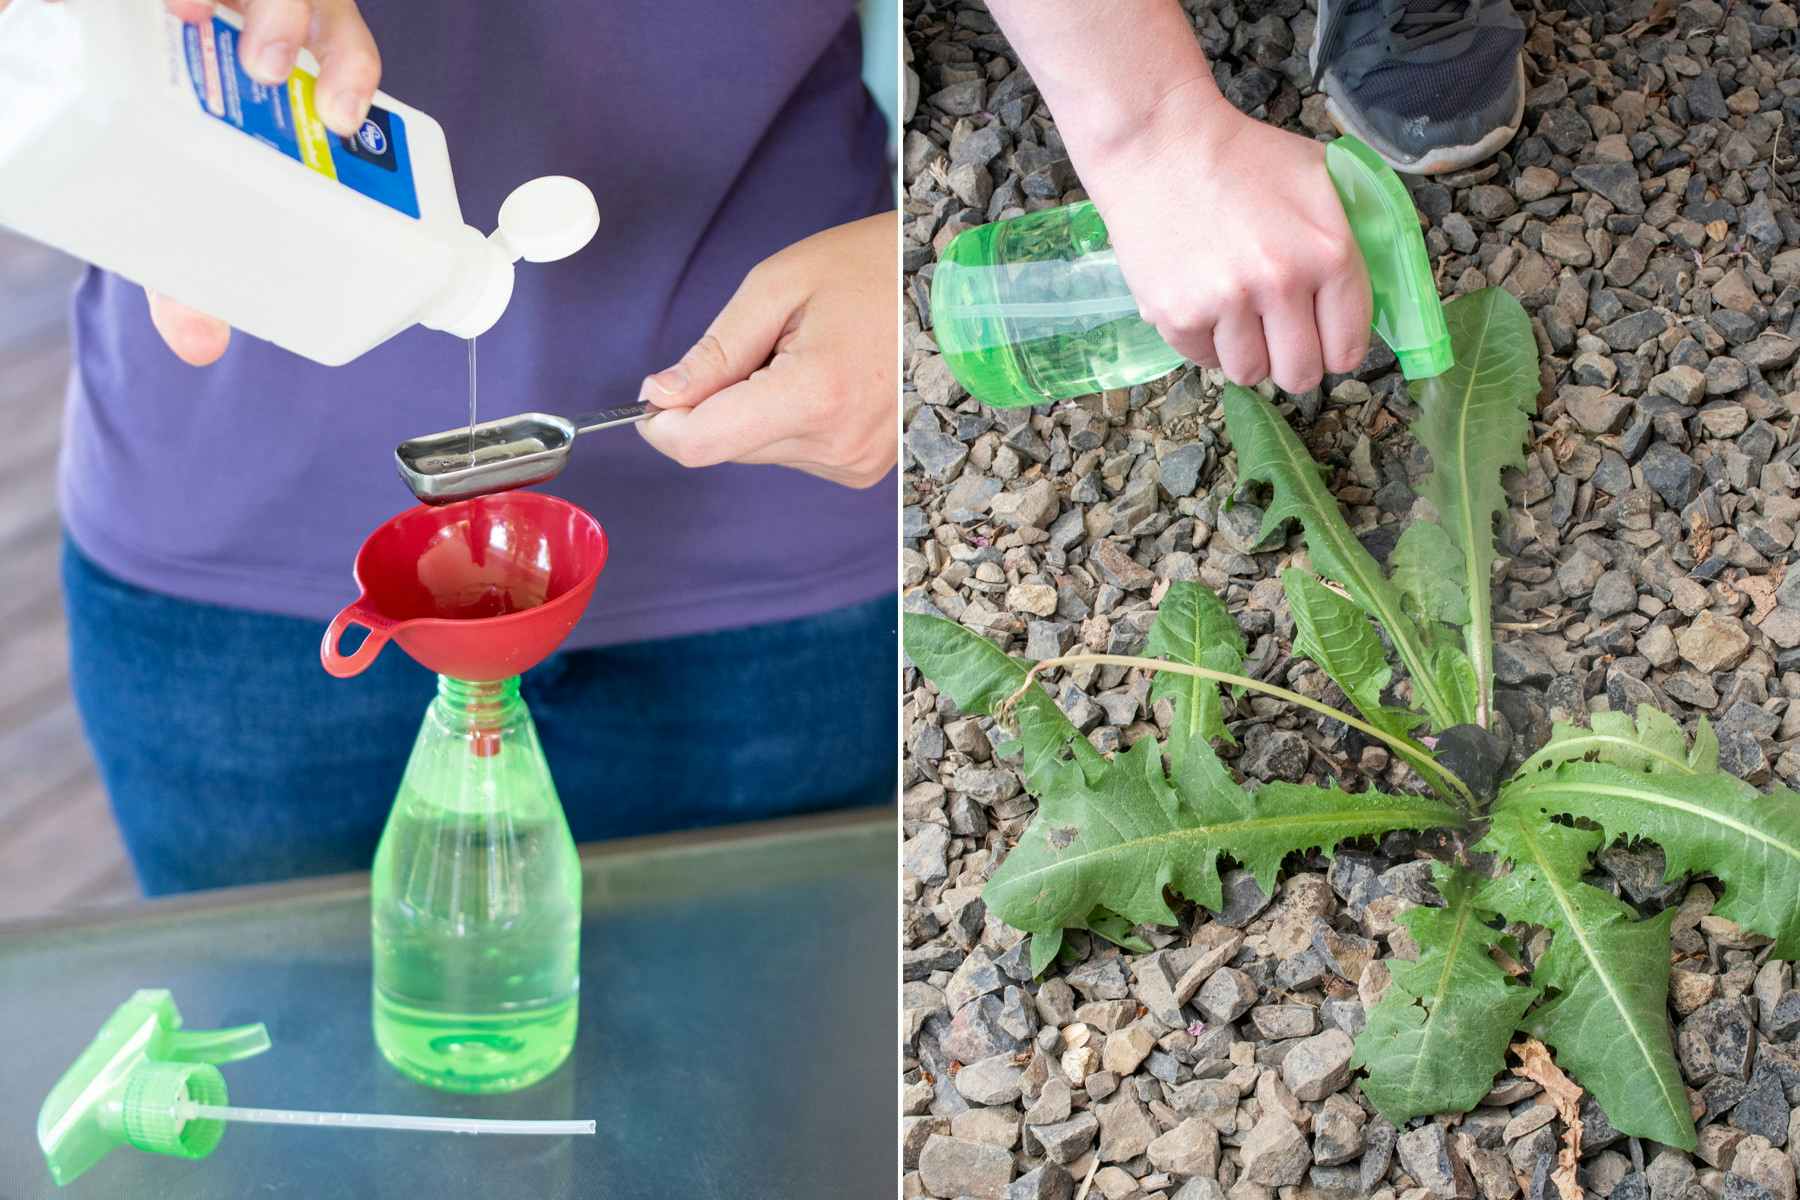 Woman pouring rubbing alcohol into a measuring spoon then spray bottle to kill weeds